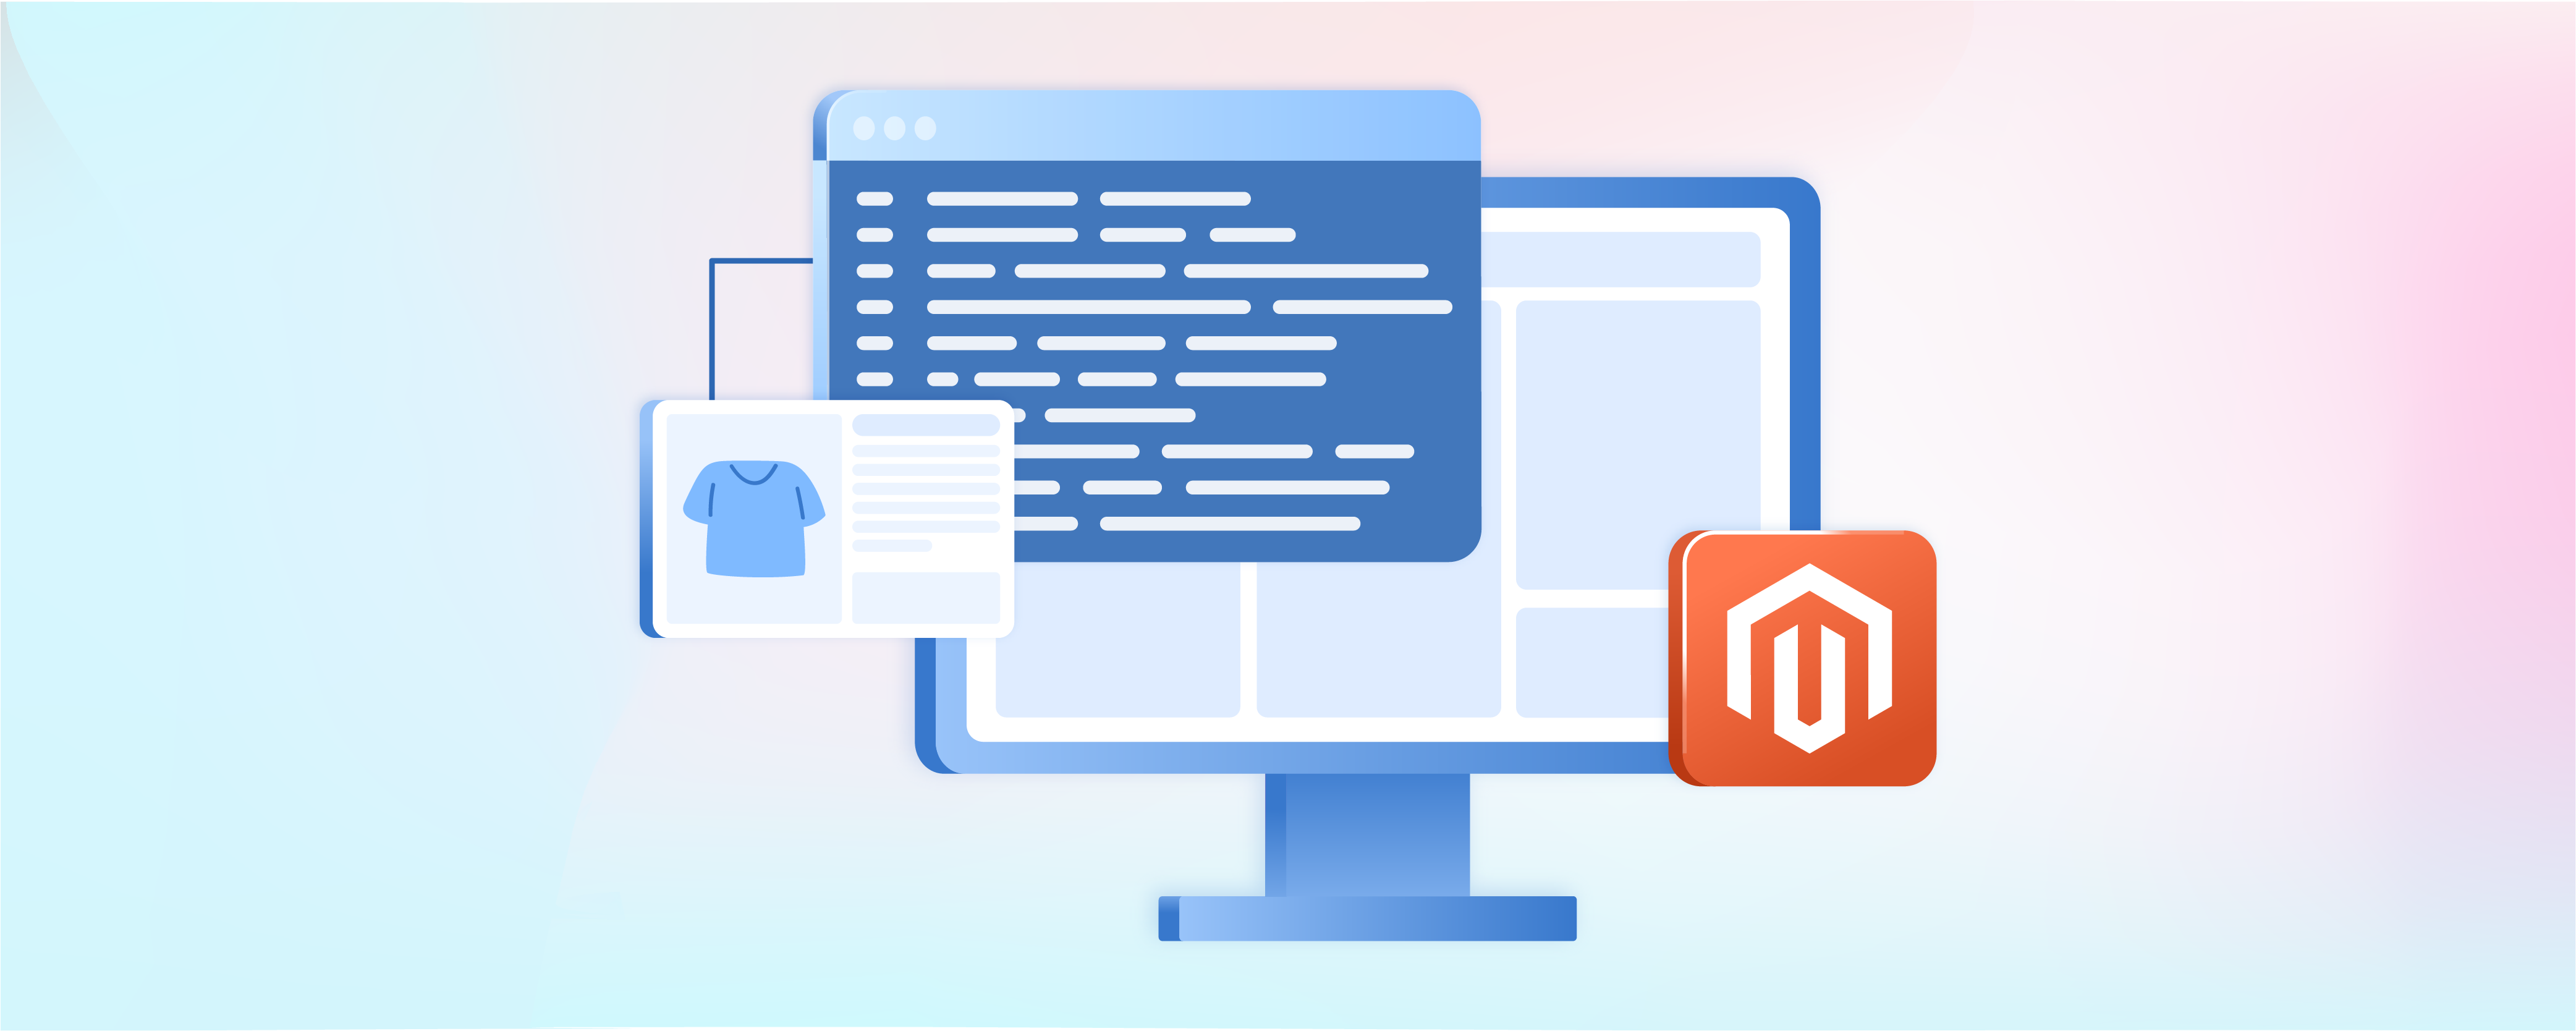 Magento Web Development Services: 9 Steps of Developing Ecommerce Site